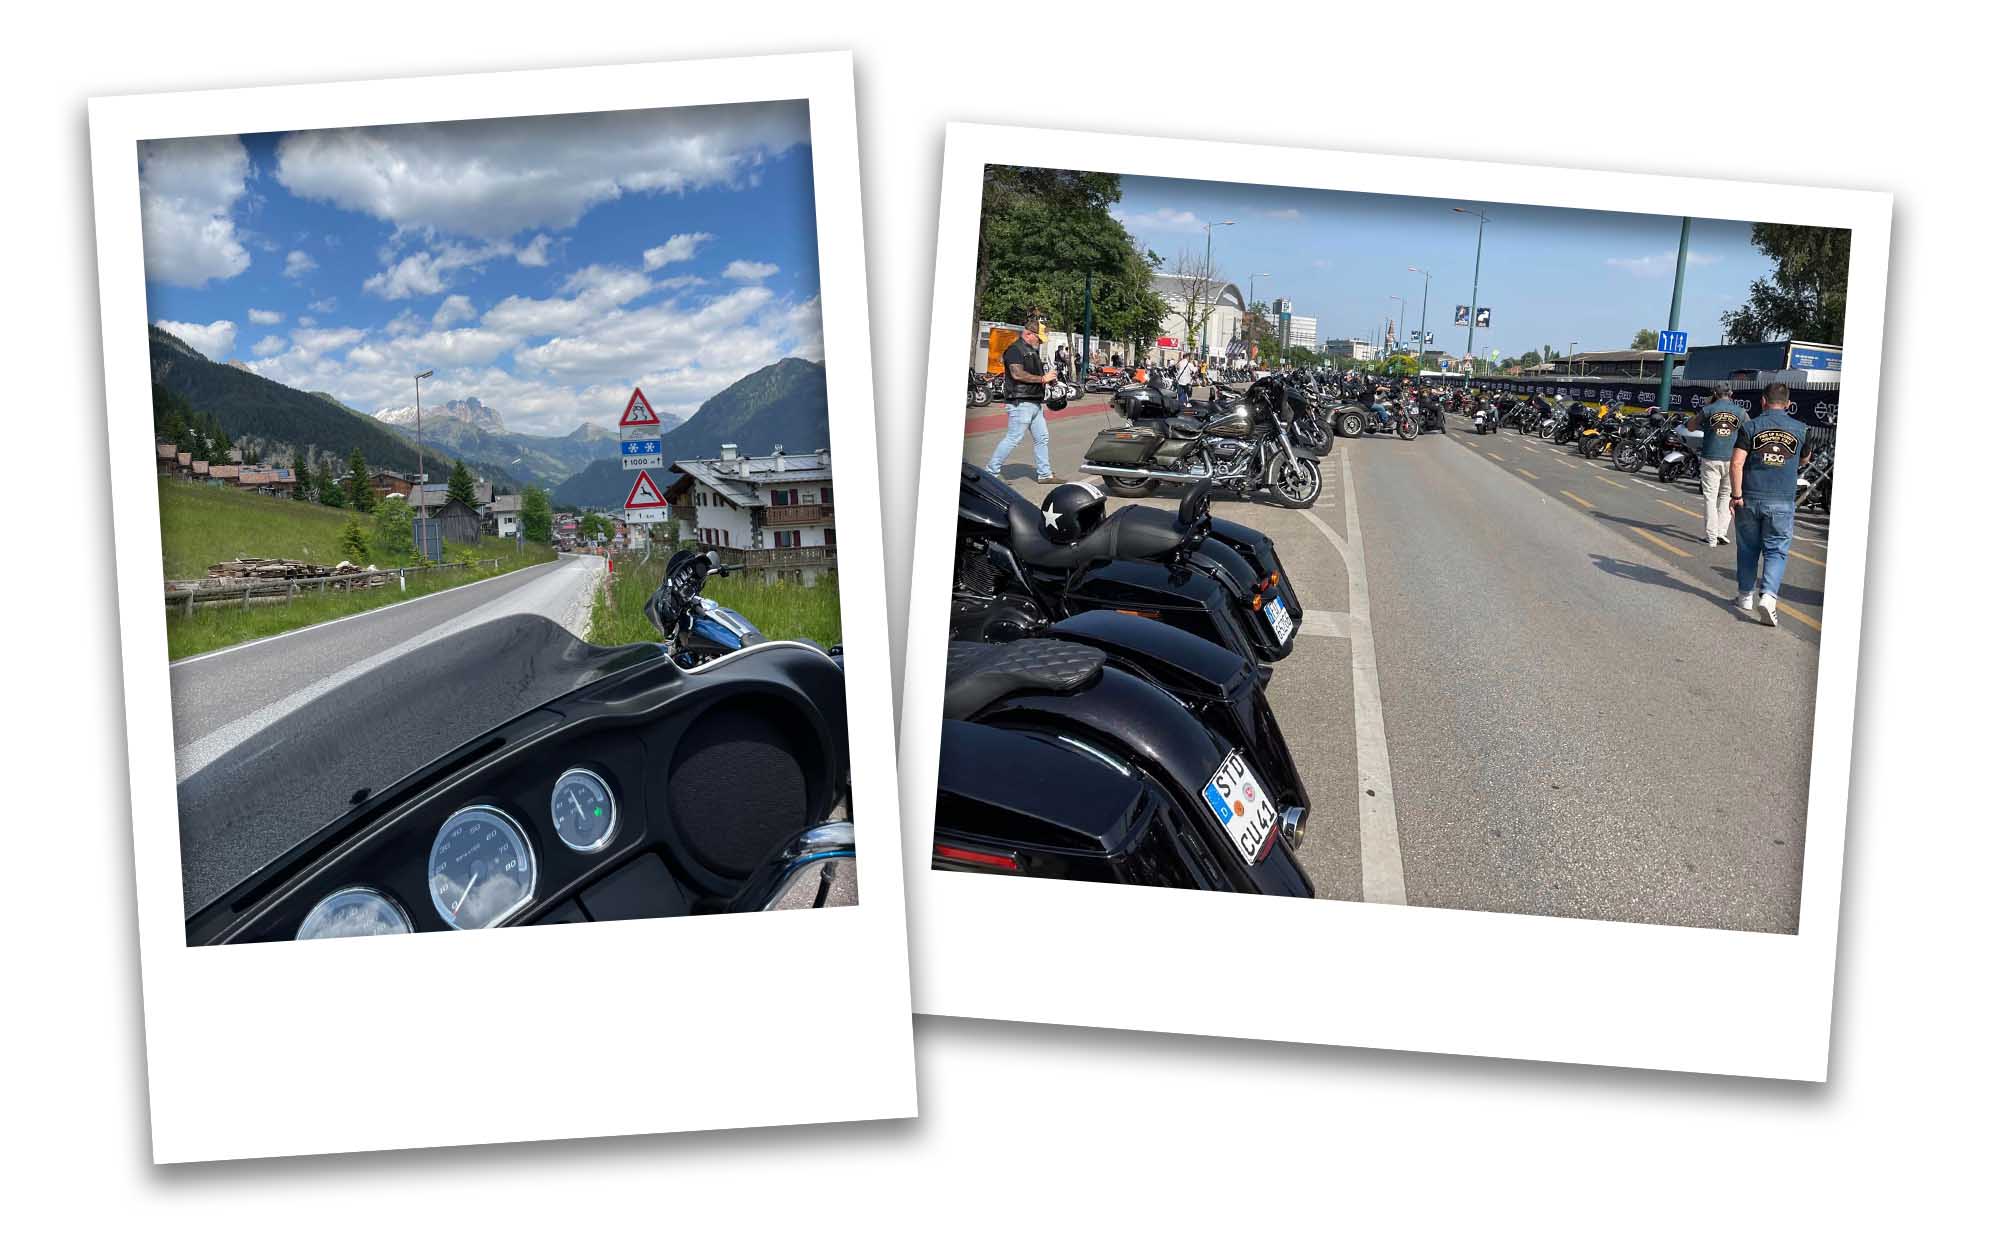 Mel's road trip from Maidstone Harley-Davidson to Budapest